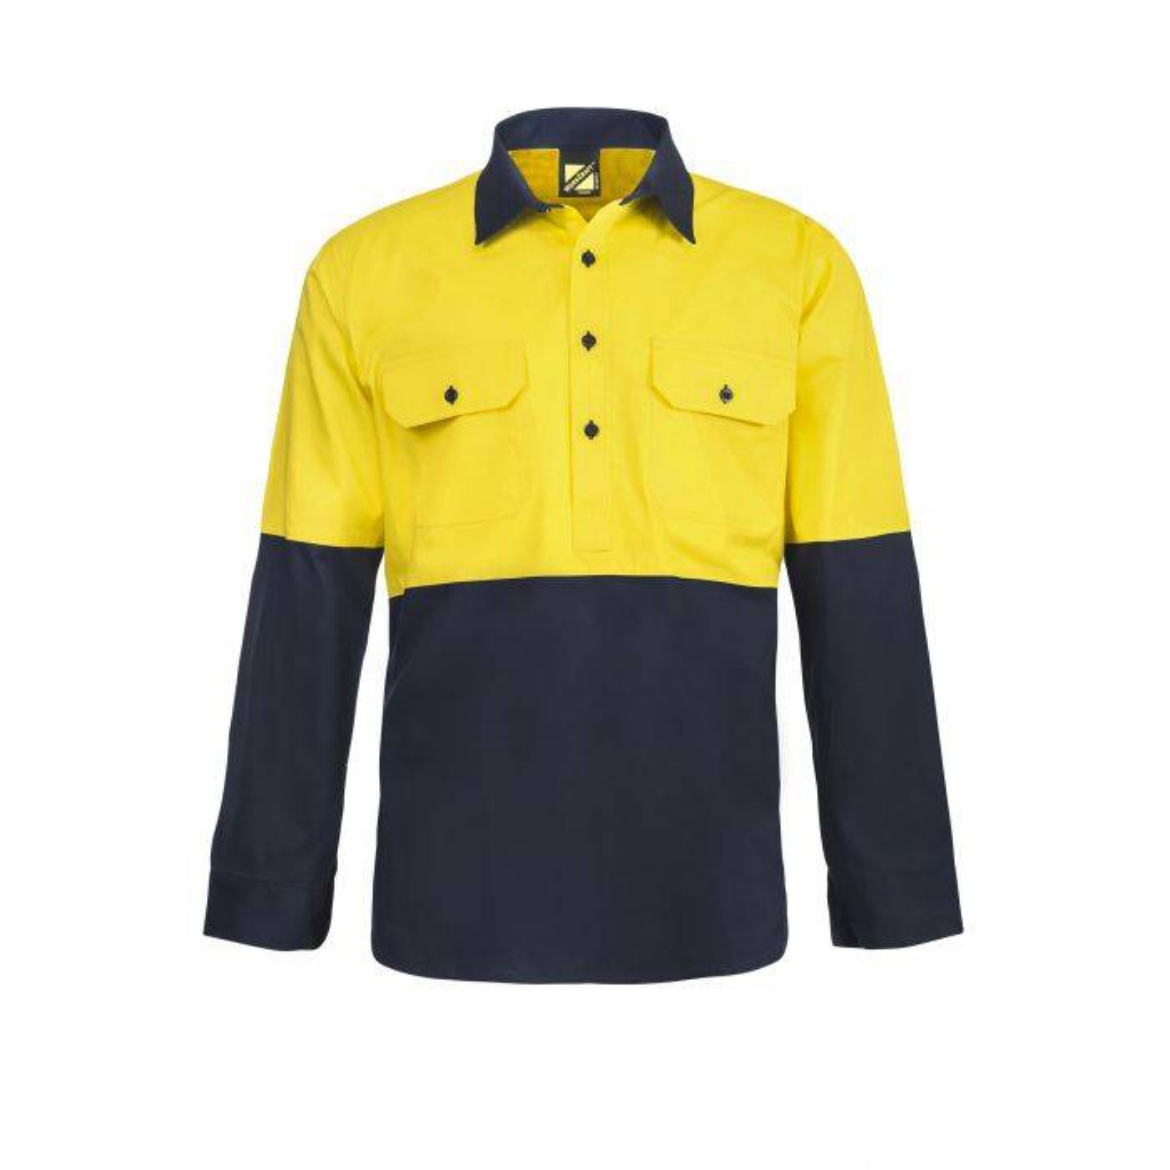 Picture of WorkCraft, Hi Vis Two Tone Half Placket Cotton Drill Shirt Wi Semi Gusset Sleeves